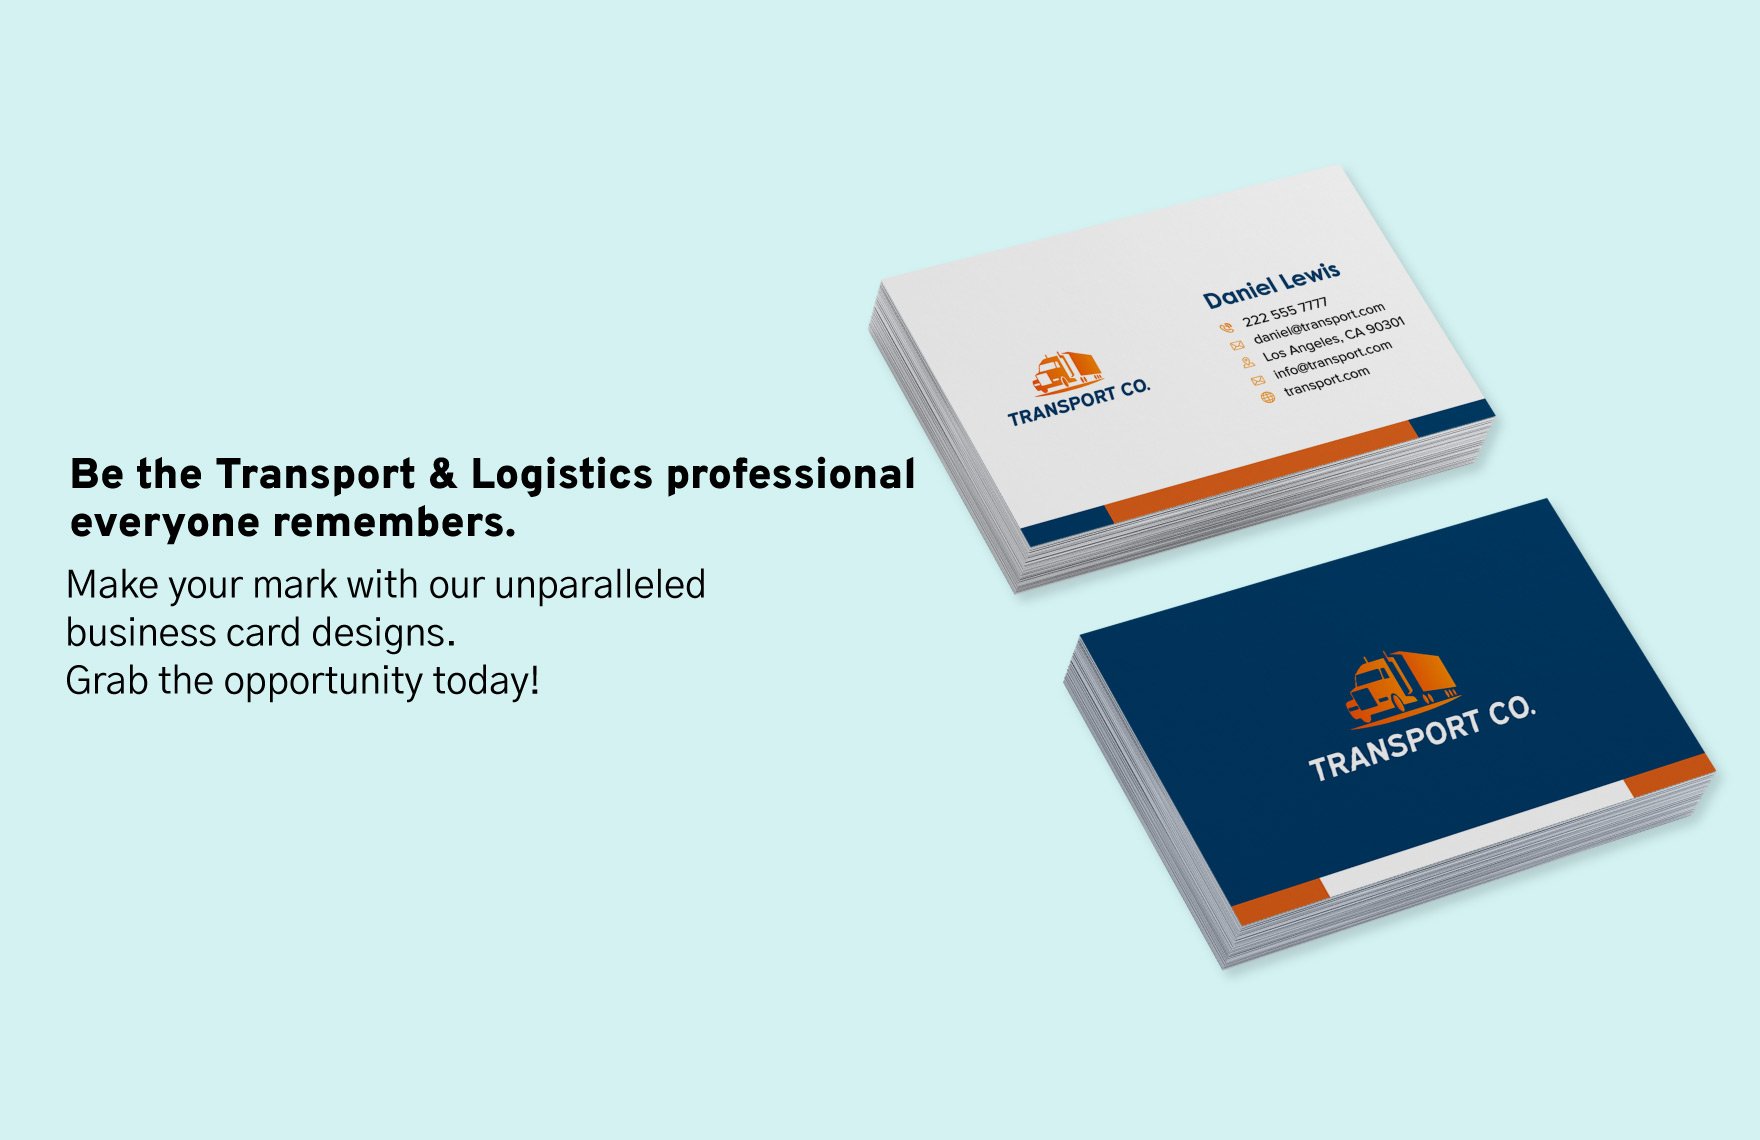 Transport and Logistics Global Freight Forwarder Business Card Template